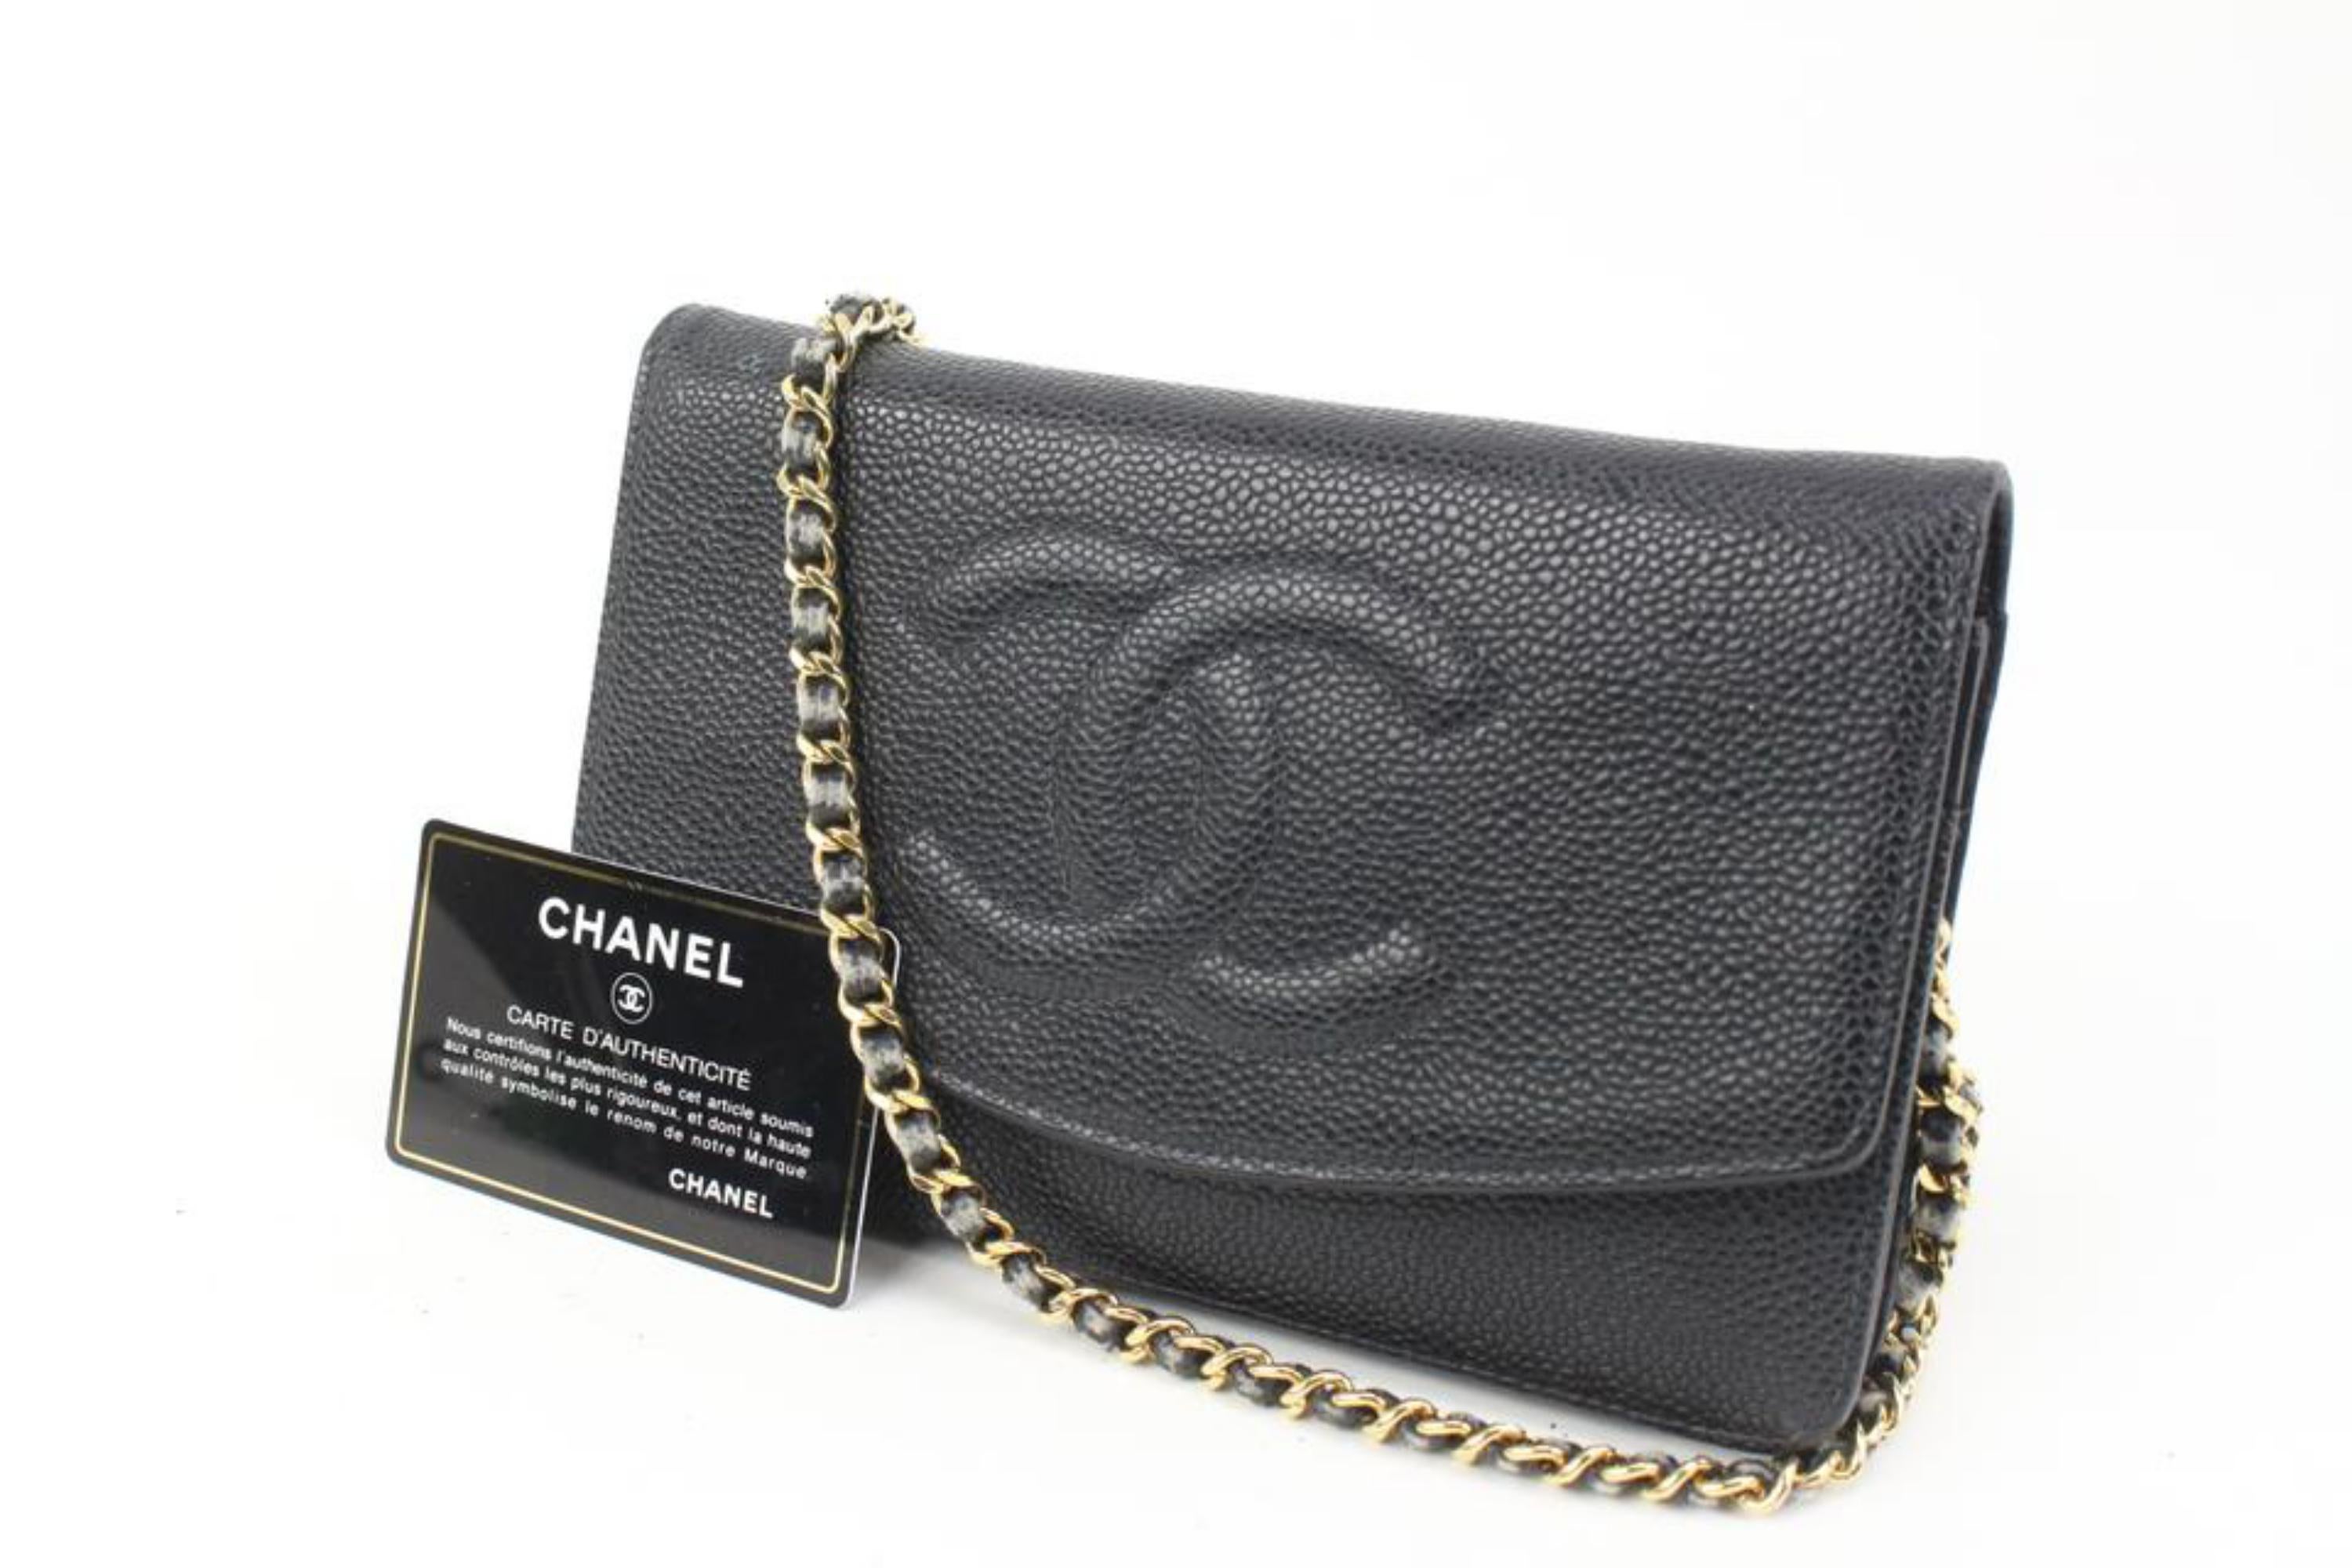 Chanel Black Caviar Leather CC Timeless Wallet on Chain WOC Gold Bag 93ck412s
Date Code/Serial Number: 8150095
Made In: France
Measurements: Length:  7.5